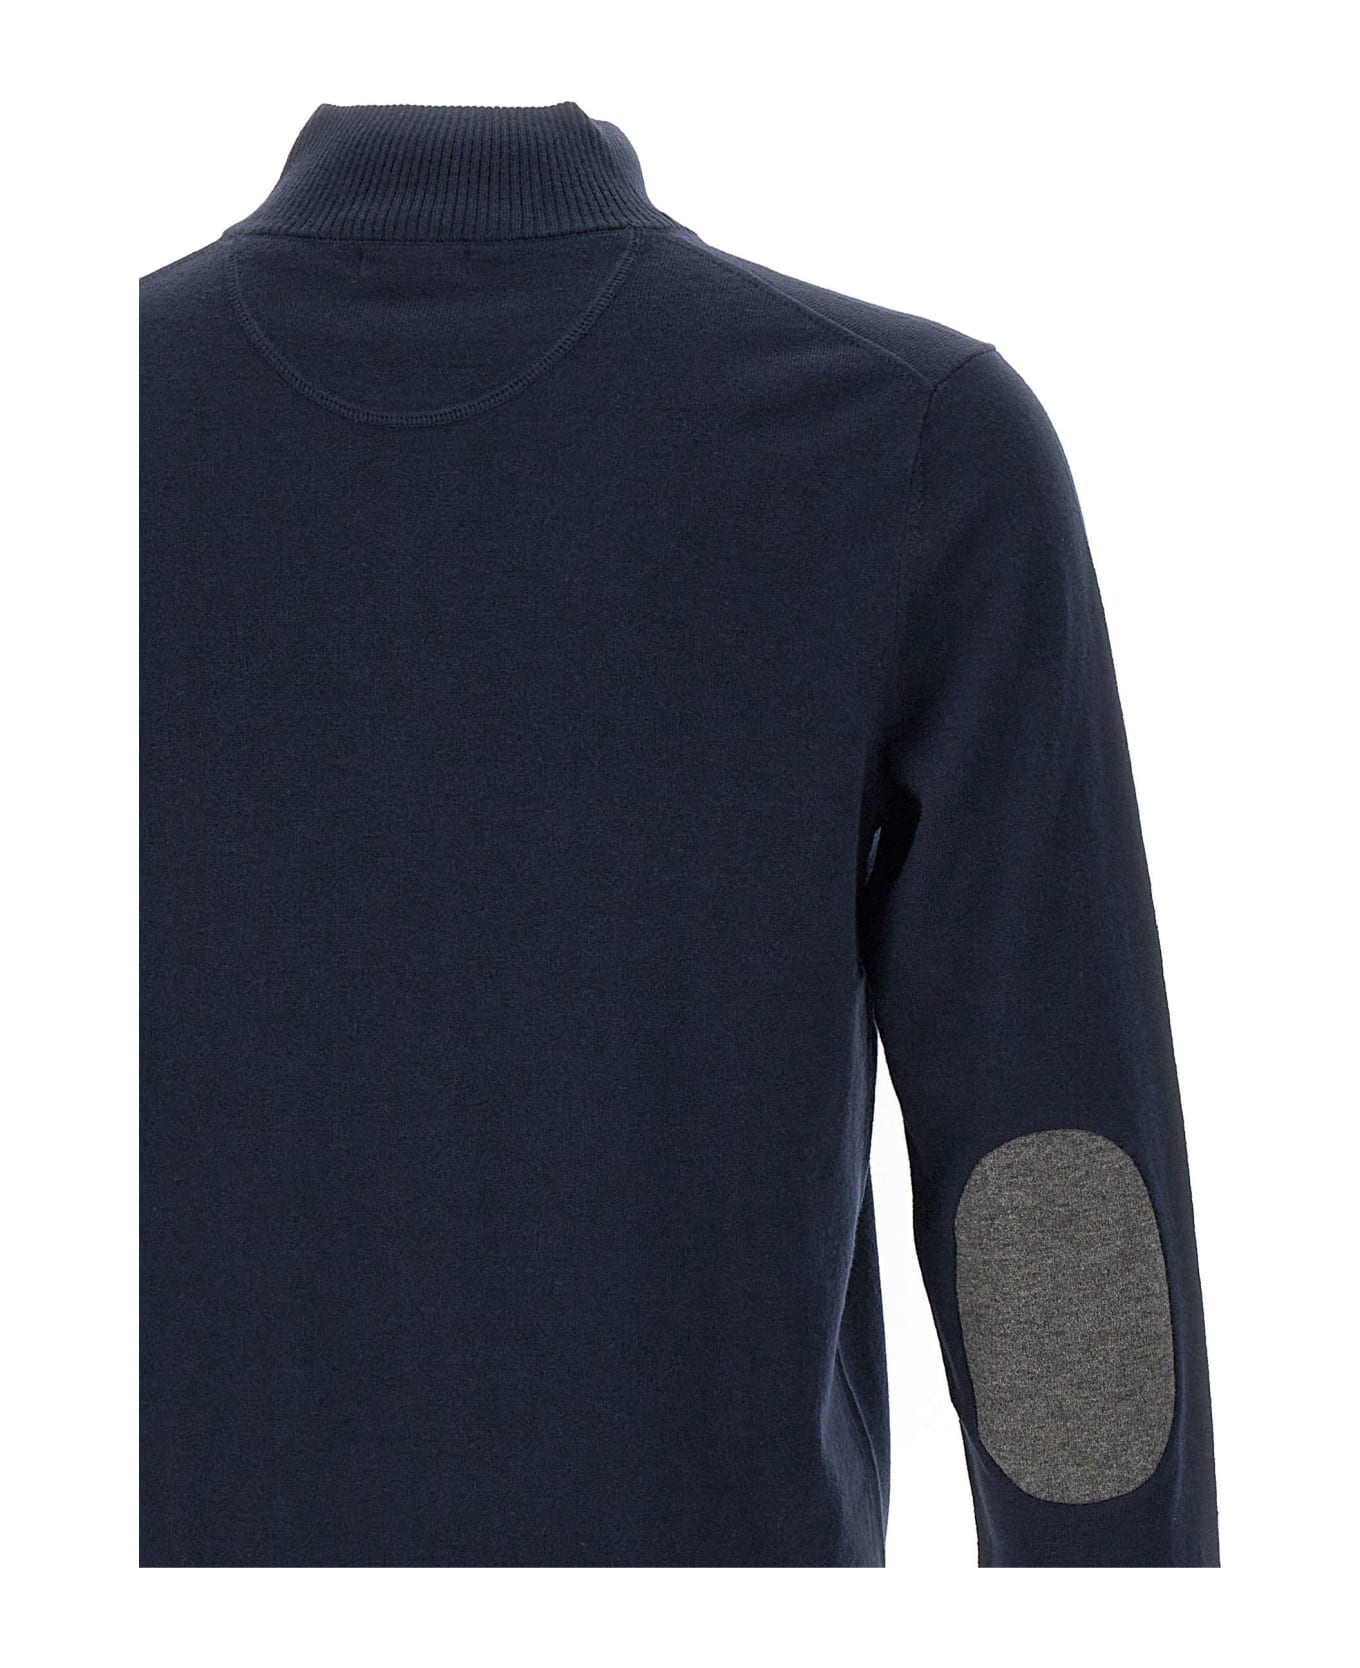 Sun 68 'stripes' Cotton And Wool Sweater Sweater - NAVY BLUE ニットウェア